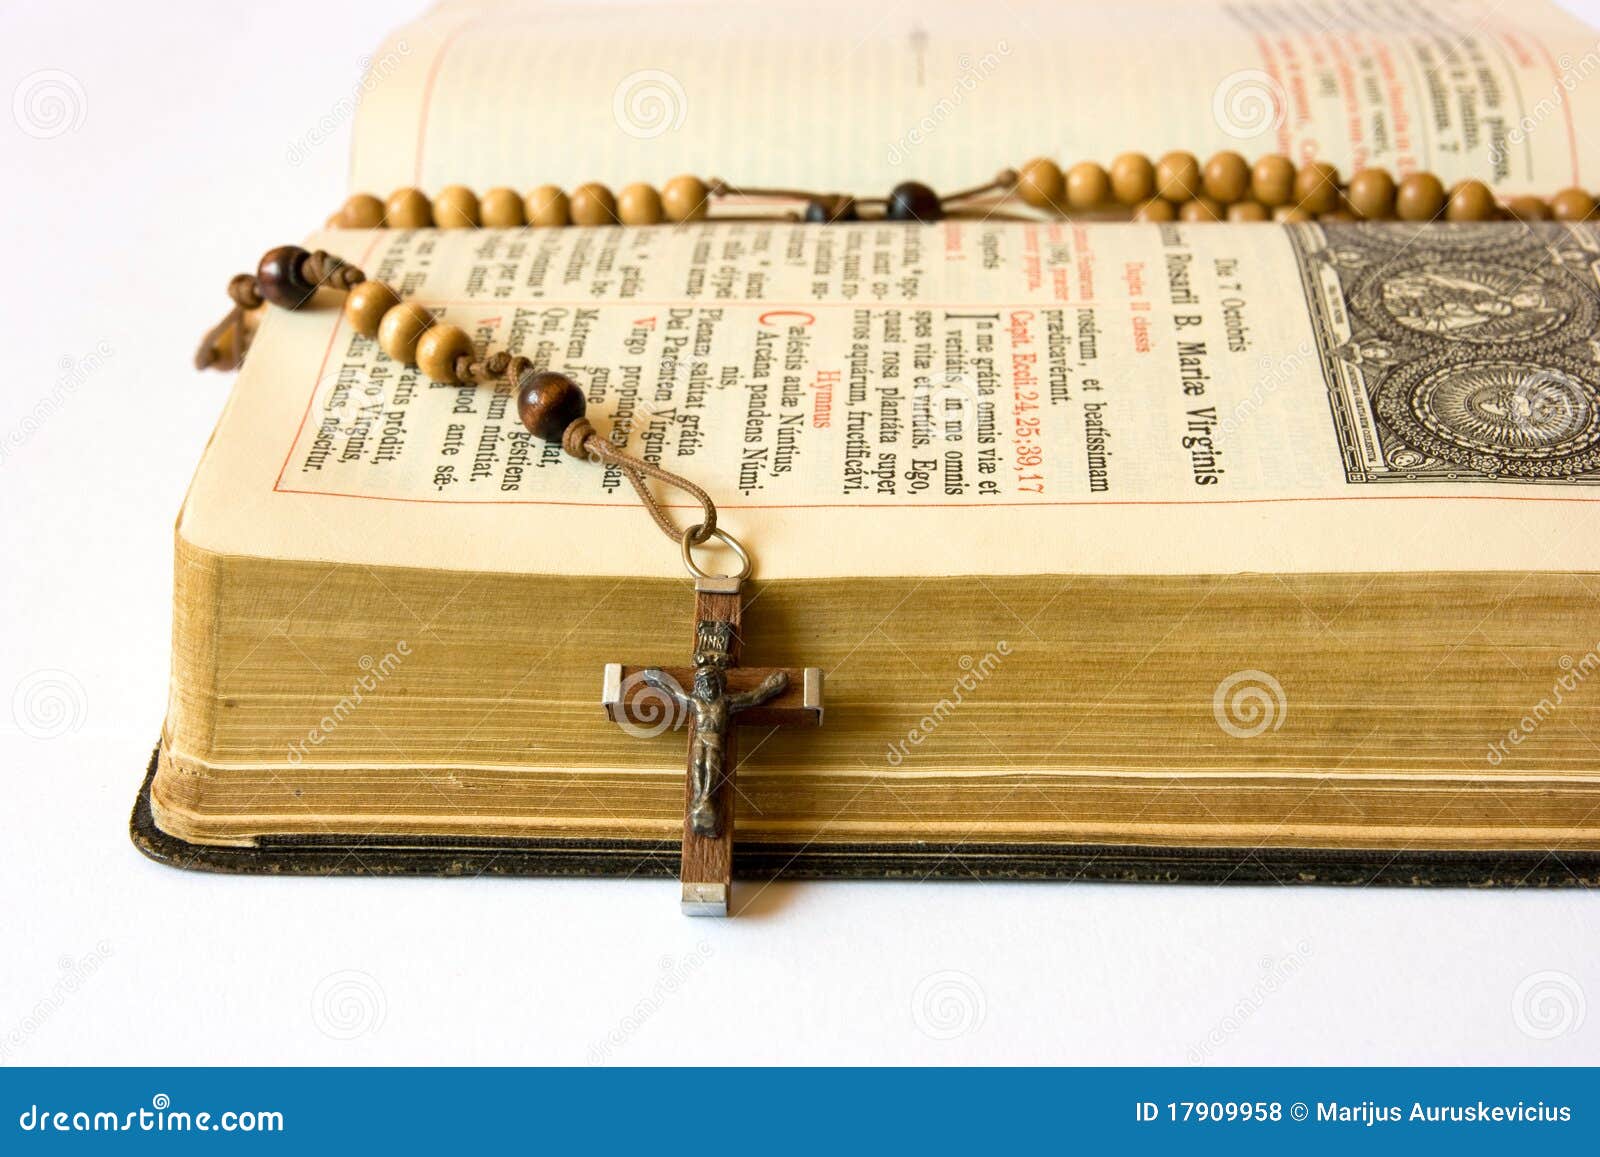 rosary beads and breviary